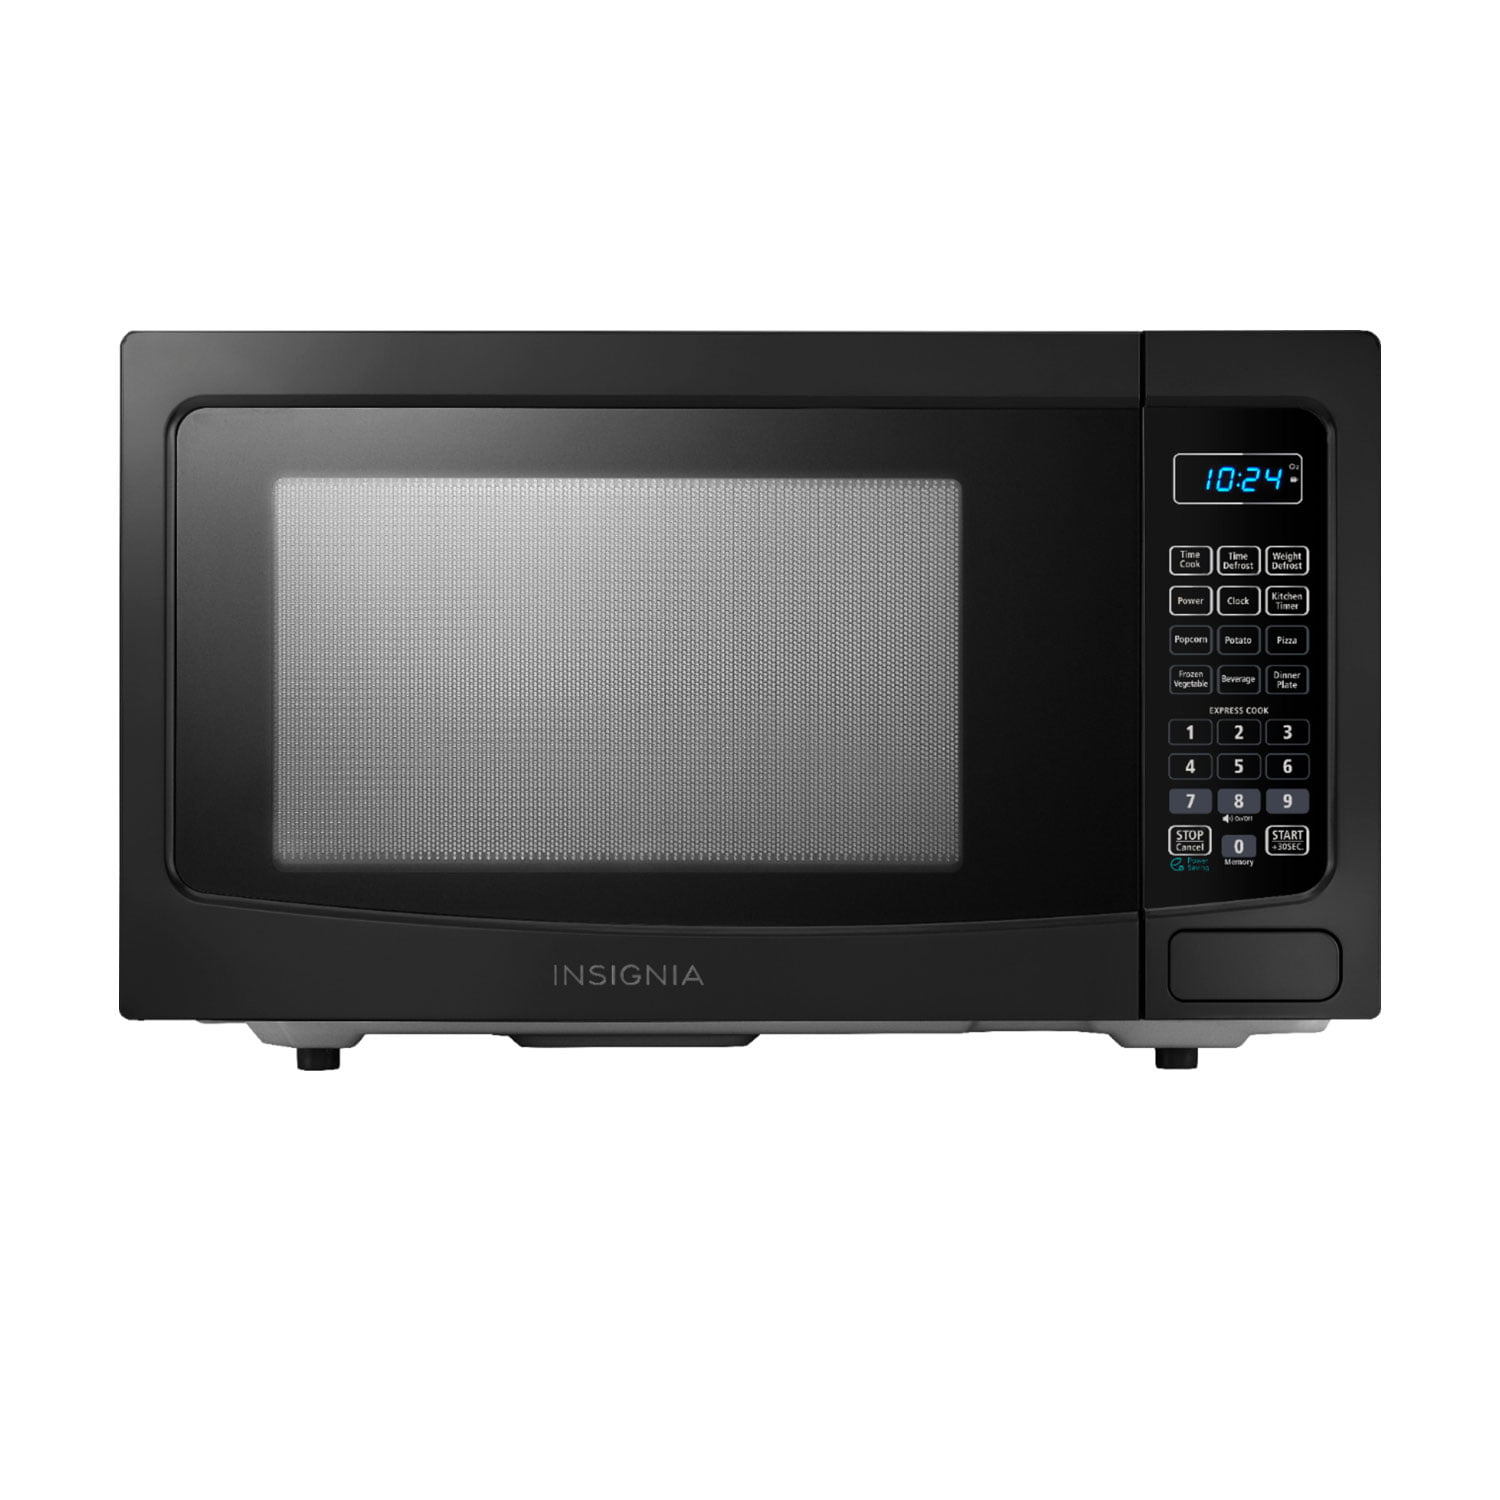 Insignia Countertop Microwave - 1.2 Cu. Ft. - Stainless Steel/Black Never  Used just NO BOX 